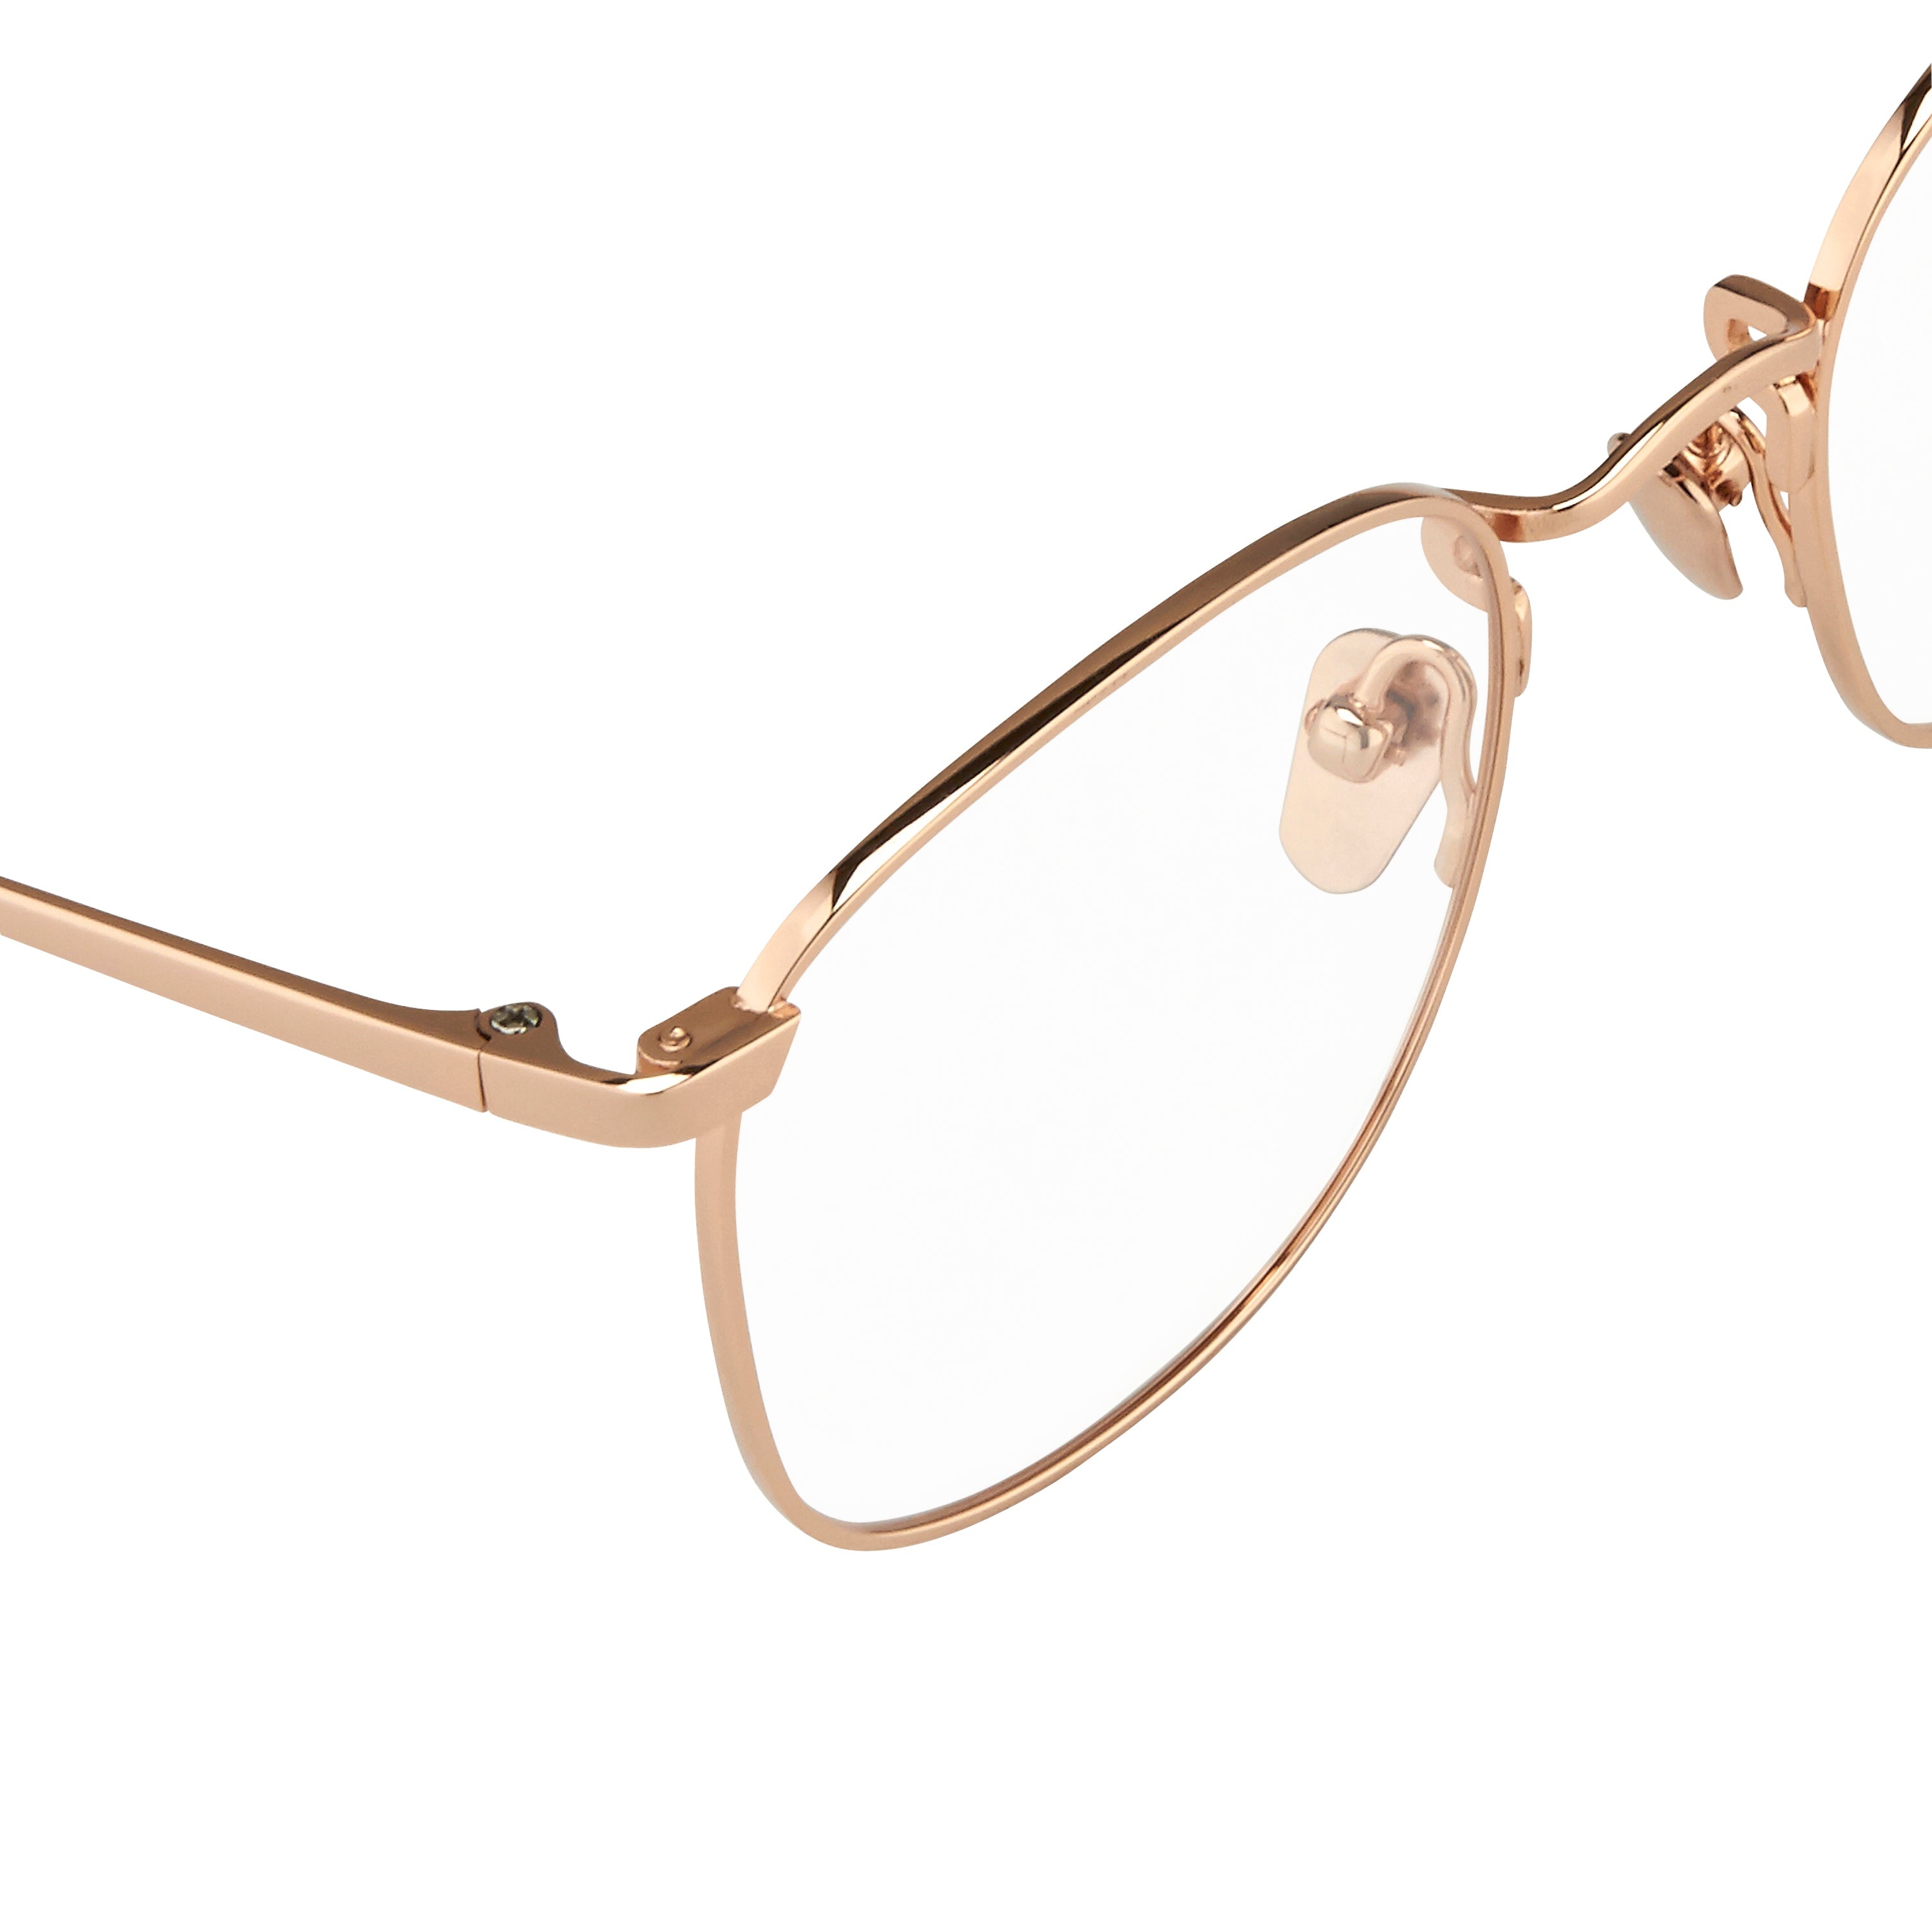 THE SIMON | SQUARE OPTICAL FRAME IN ROSE GOLD (C8) - 4